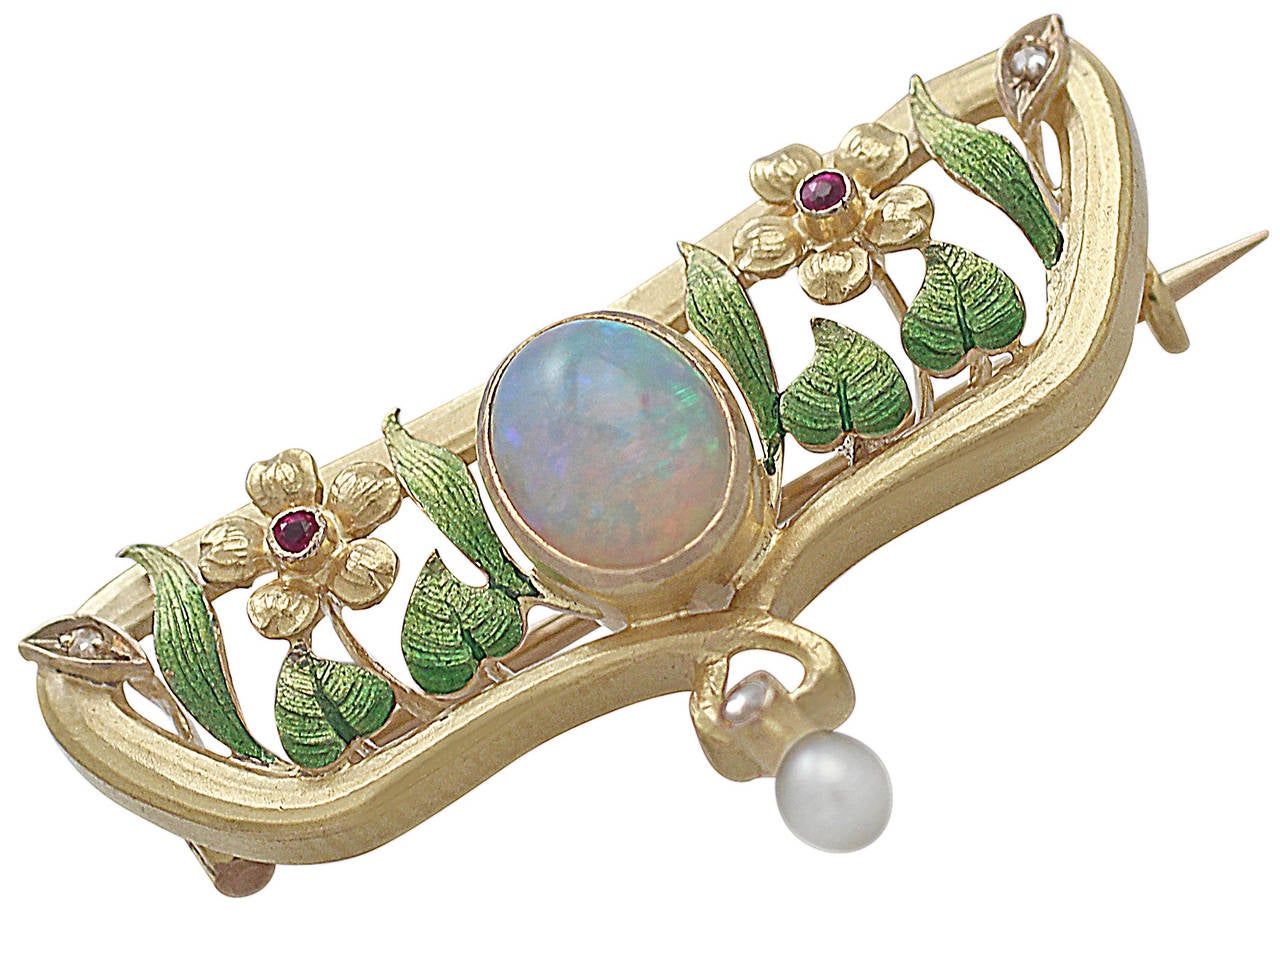 A fine and impressive opal, diamond, ruby and pearl enamelled 18 karat yellow gold Art Nouveau style brooch; part of our antique jewelry and estate jewelry collections

This fine 1920's brooch has been crafted in 18k yellow gold.

The brooch has